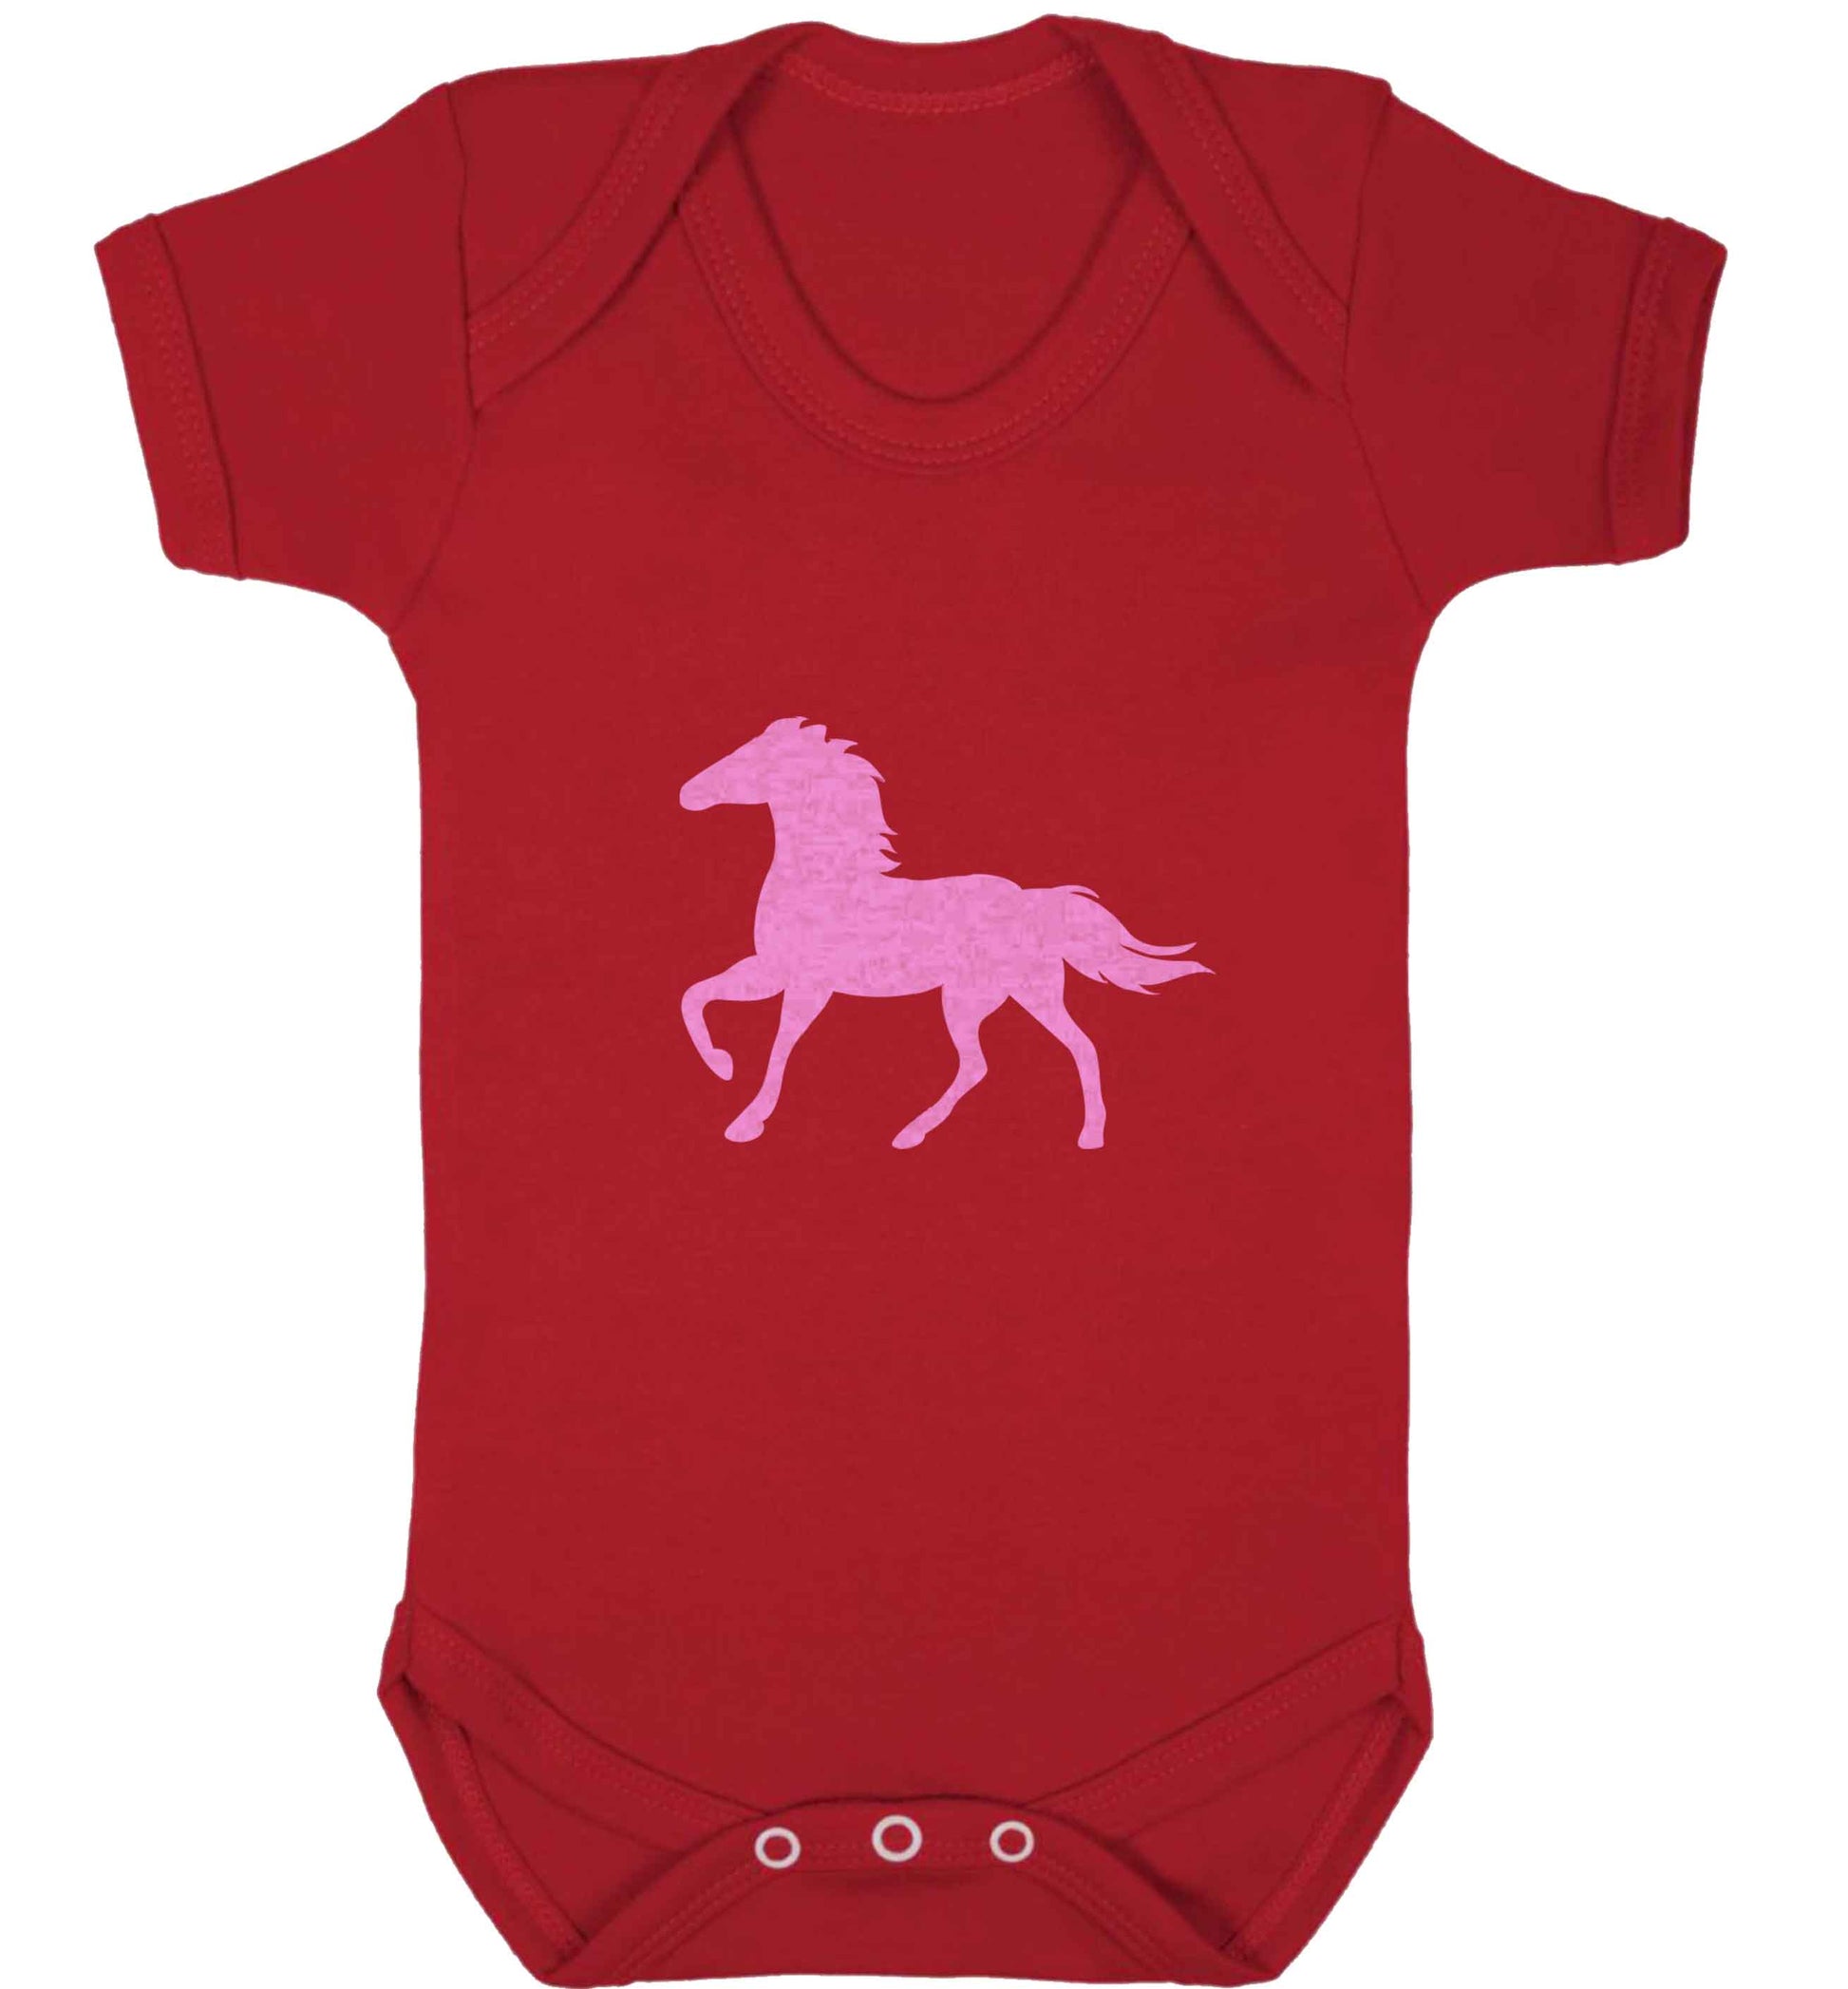 Pink horse baby vest red 18-24 months